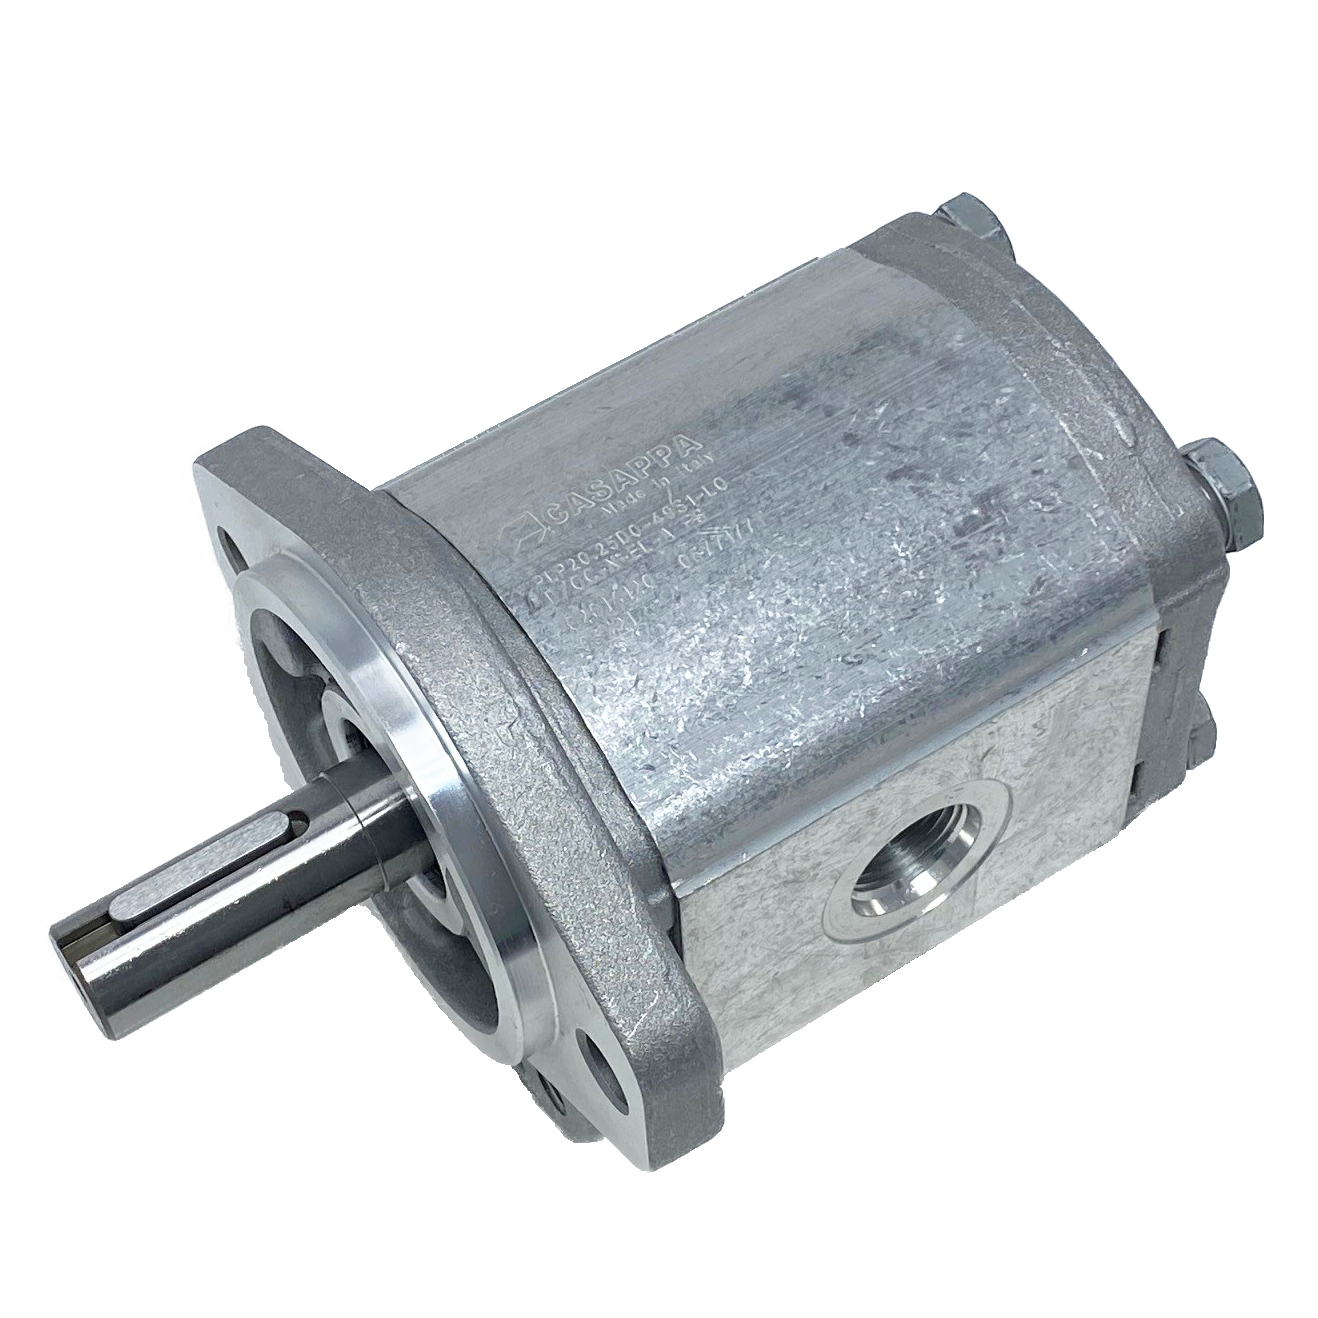 PHP20.31,5S0-49S9-LOG/OC-N-EL : Casappa Polaris Gear Pump, 33.03cc, 2900psi Rated, 2500RPM, CCW, 3/4" Bore x 3/16" Key Shaft, SAE A 2-Bolt Flange, 1.25" #20 SAE Inlet, 0.625 (5/8") #10 SAE Outlet, Cast Iron Body, Aluminum Flange